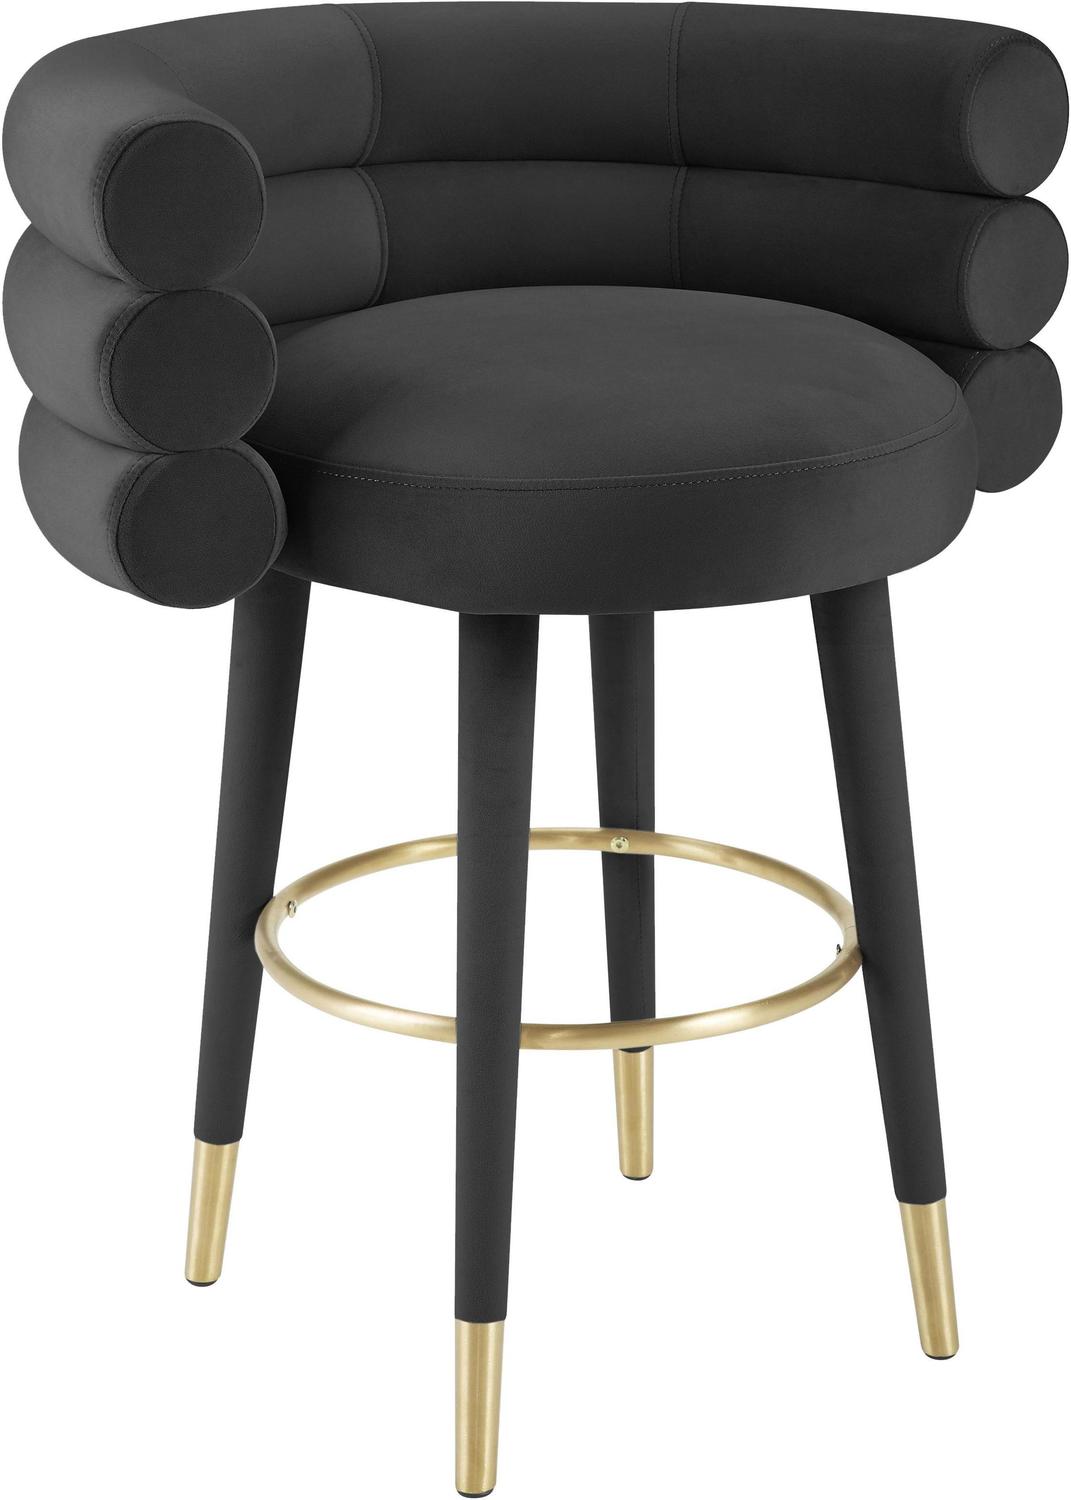  Tov Furniture Stools Bar Chairs and Stools Black